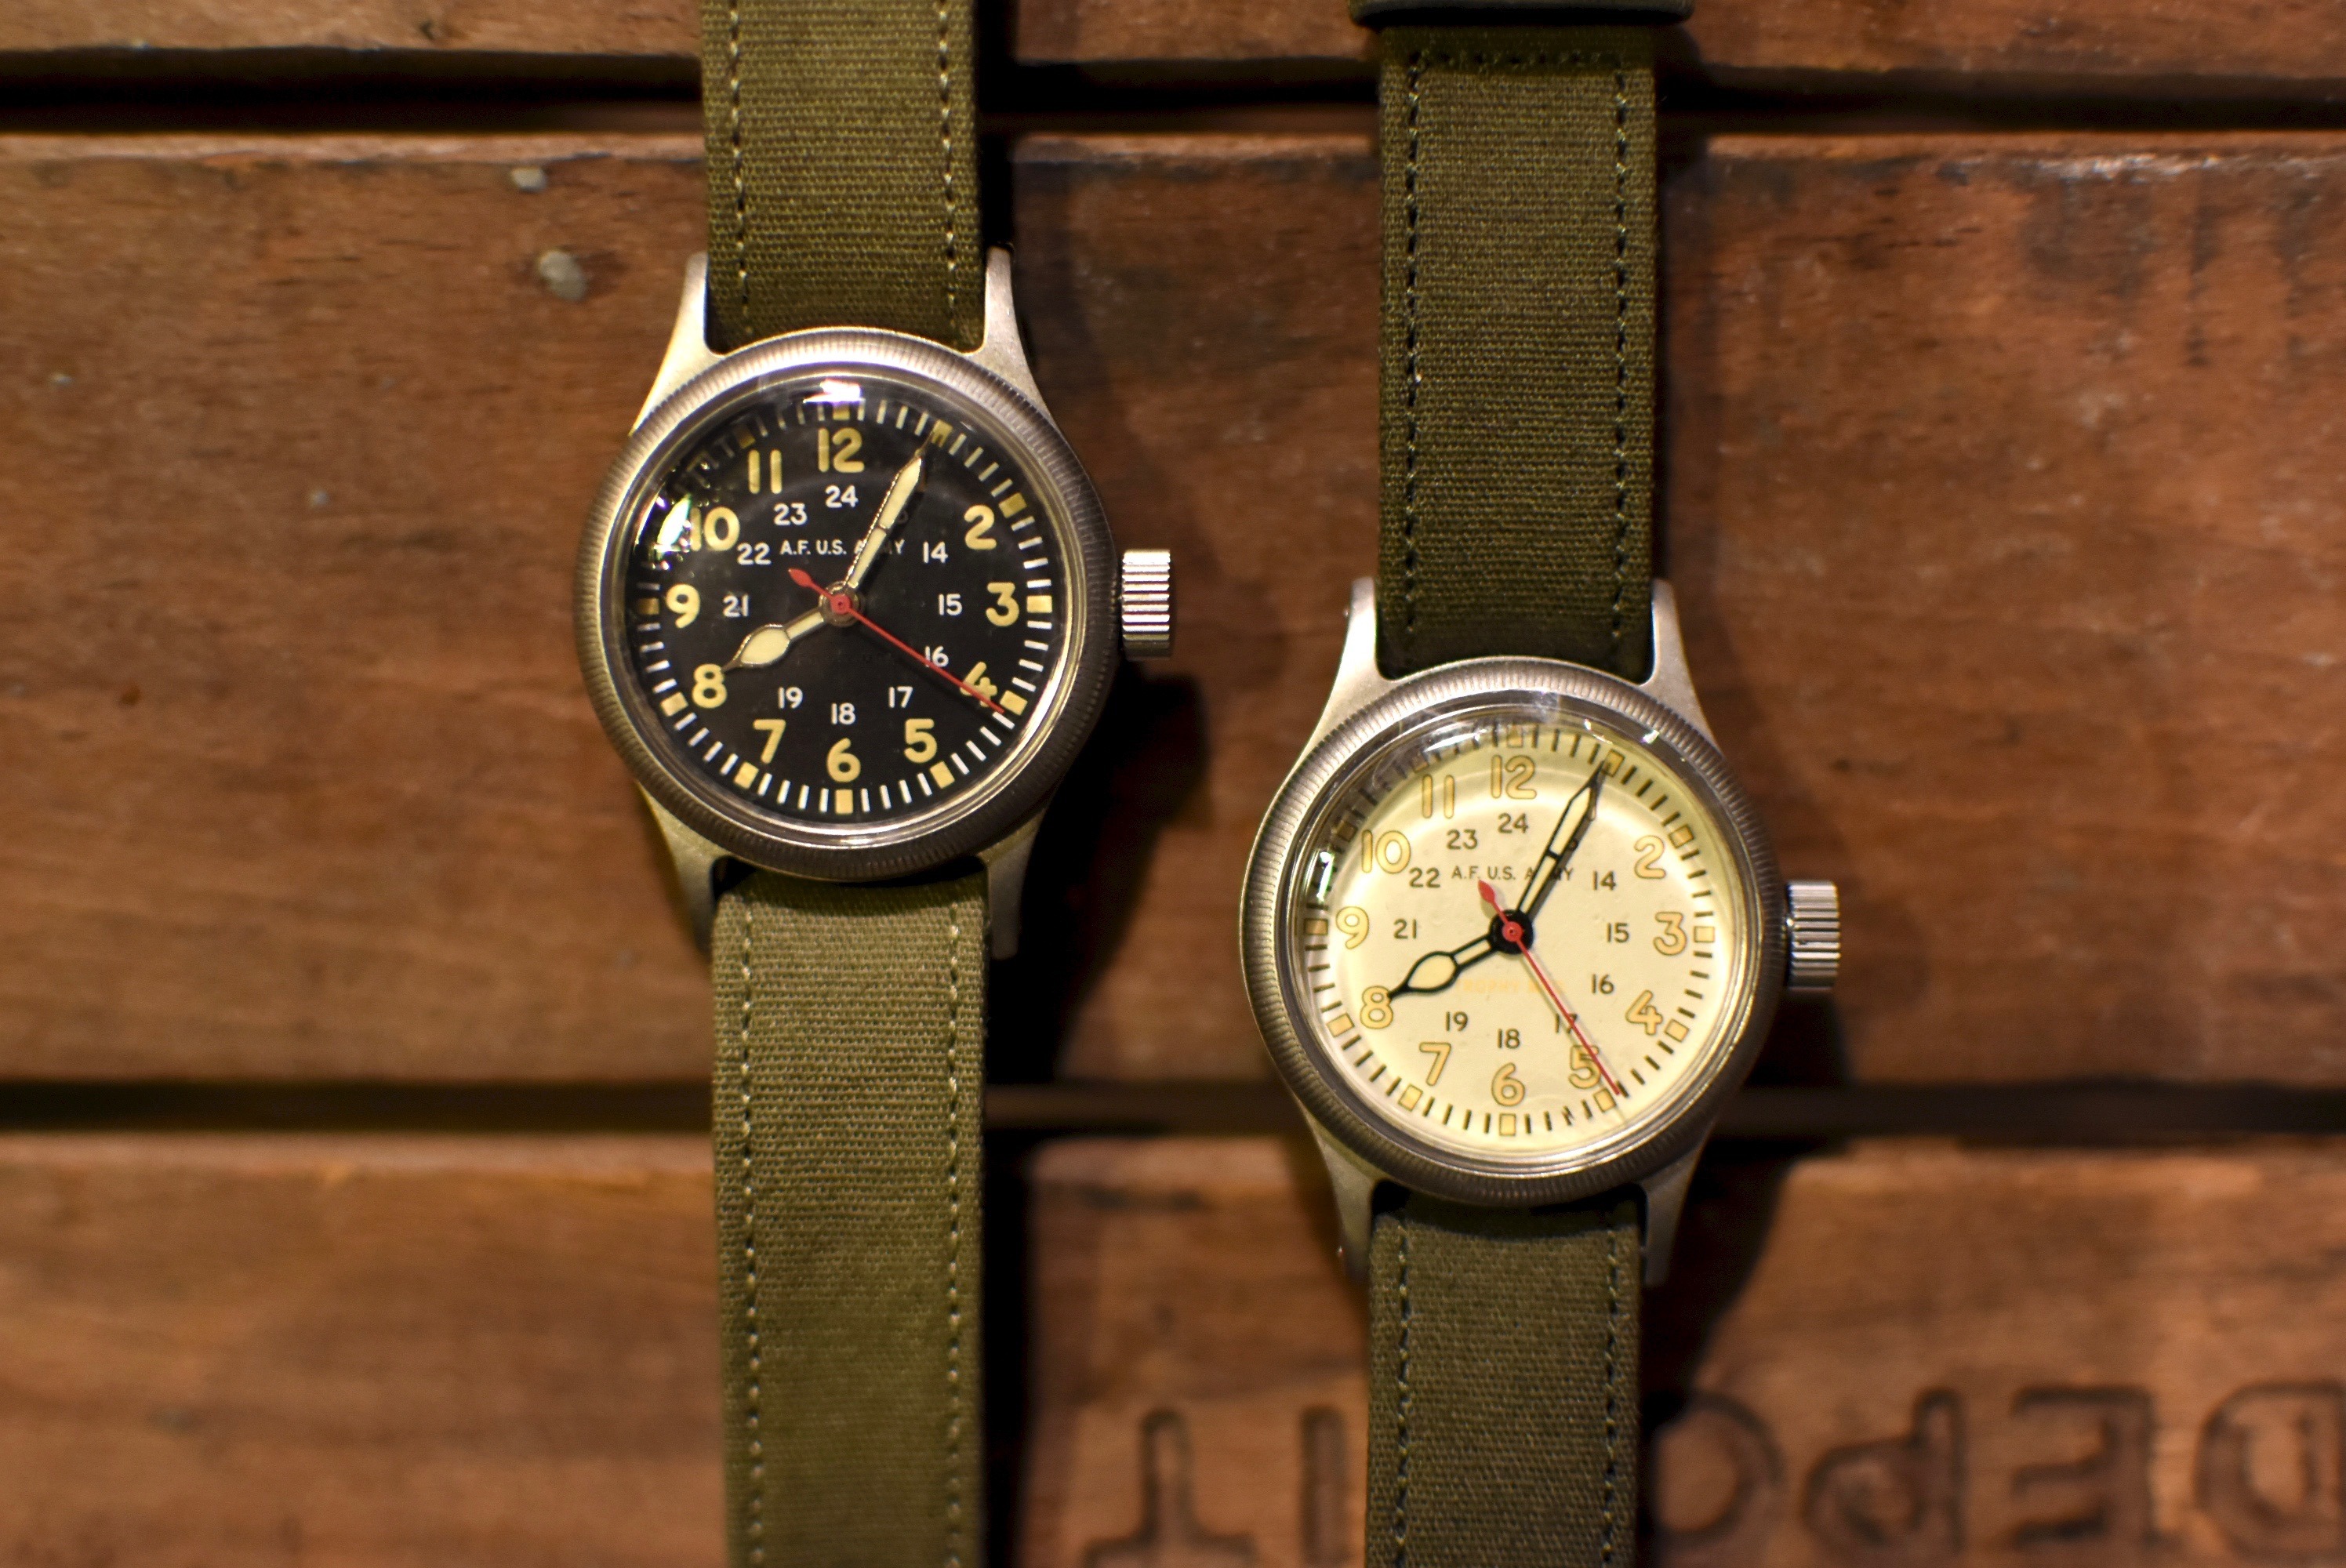 TROPHY CLOTHING - MIL PILOT WATCH....!!!: CANVAS CLOTHING STORE BLOG